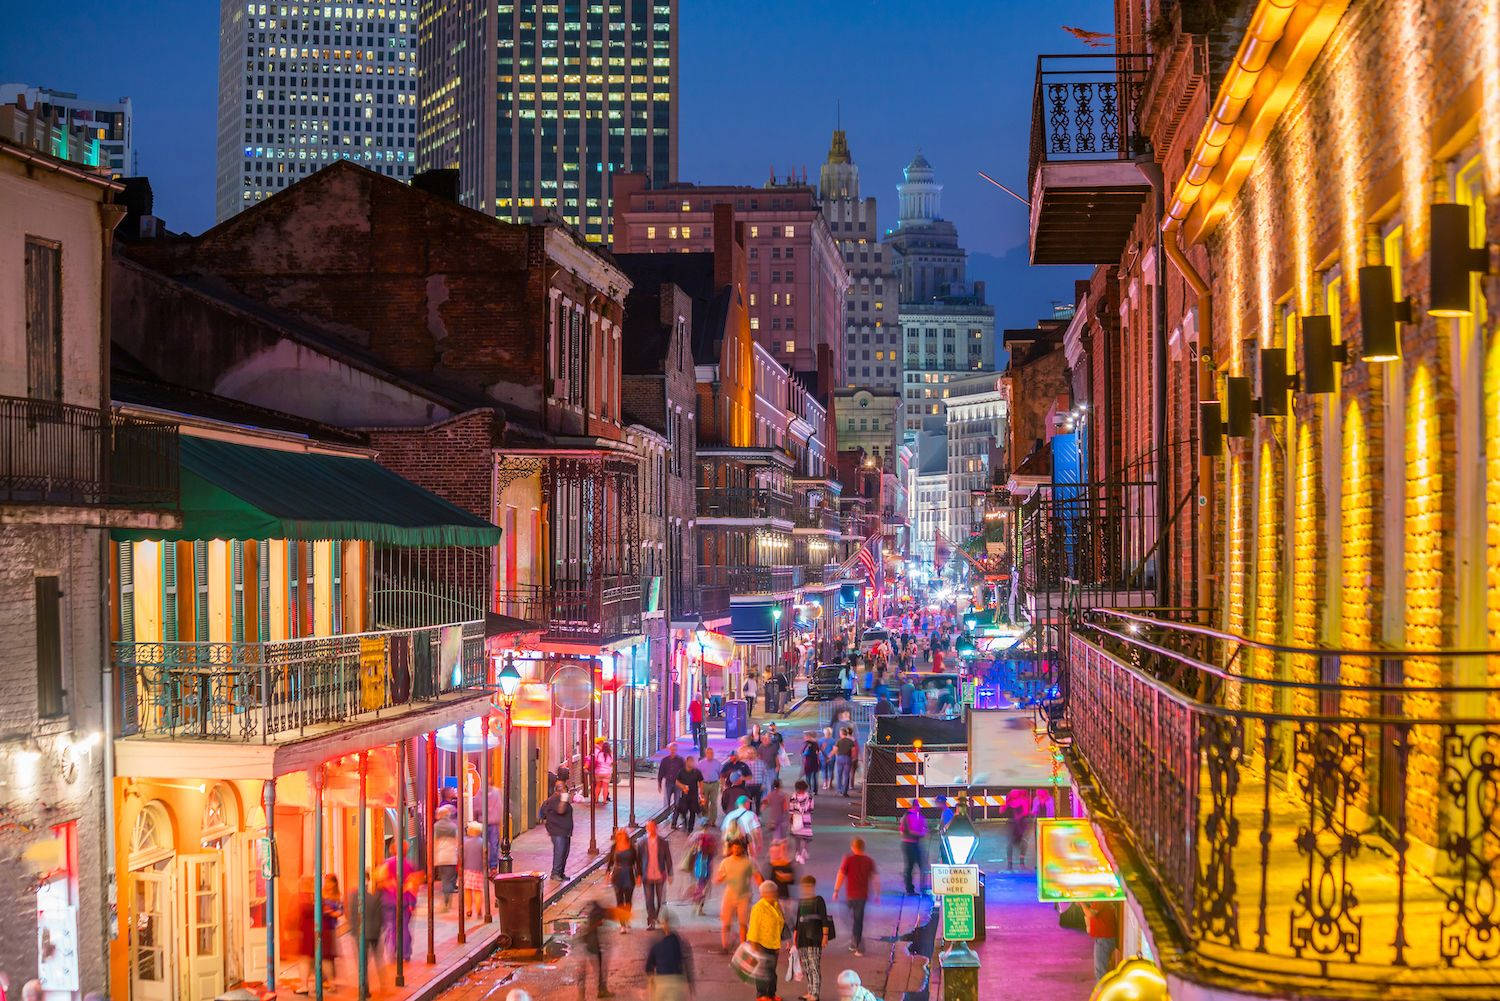 "Illuminated Street in the French Quarter" Wallpaper